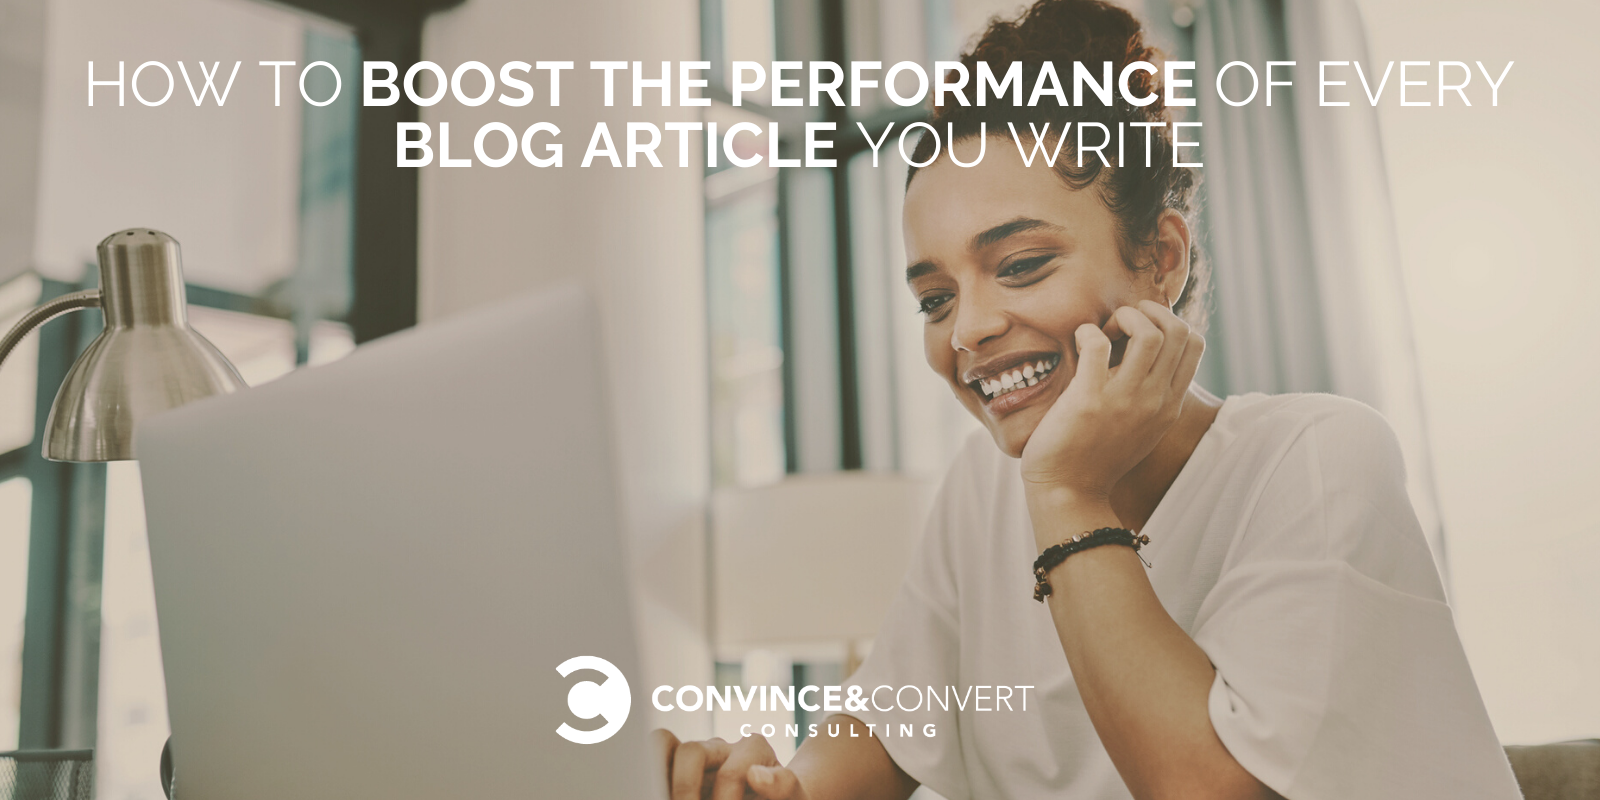 How to Boost the Performance of Every Blog Article You Write